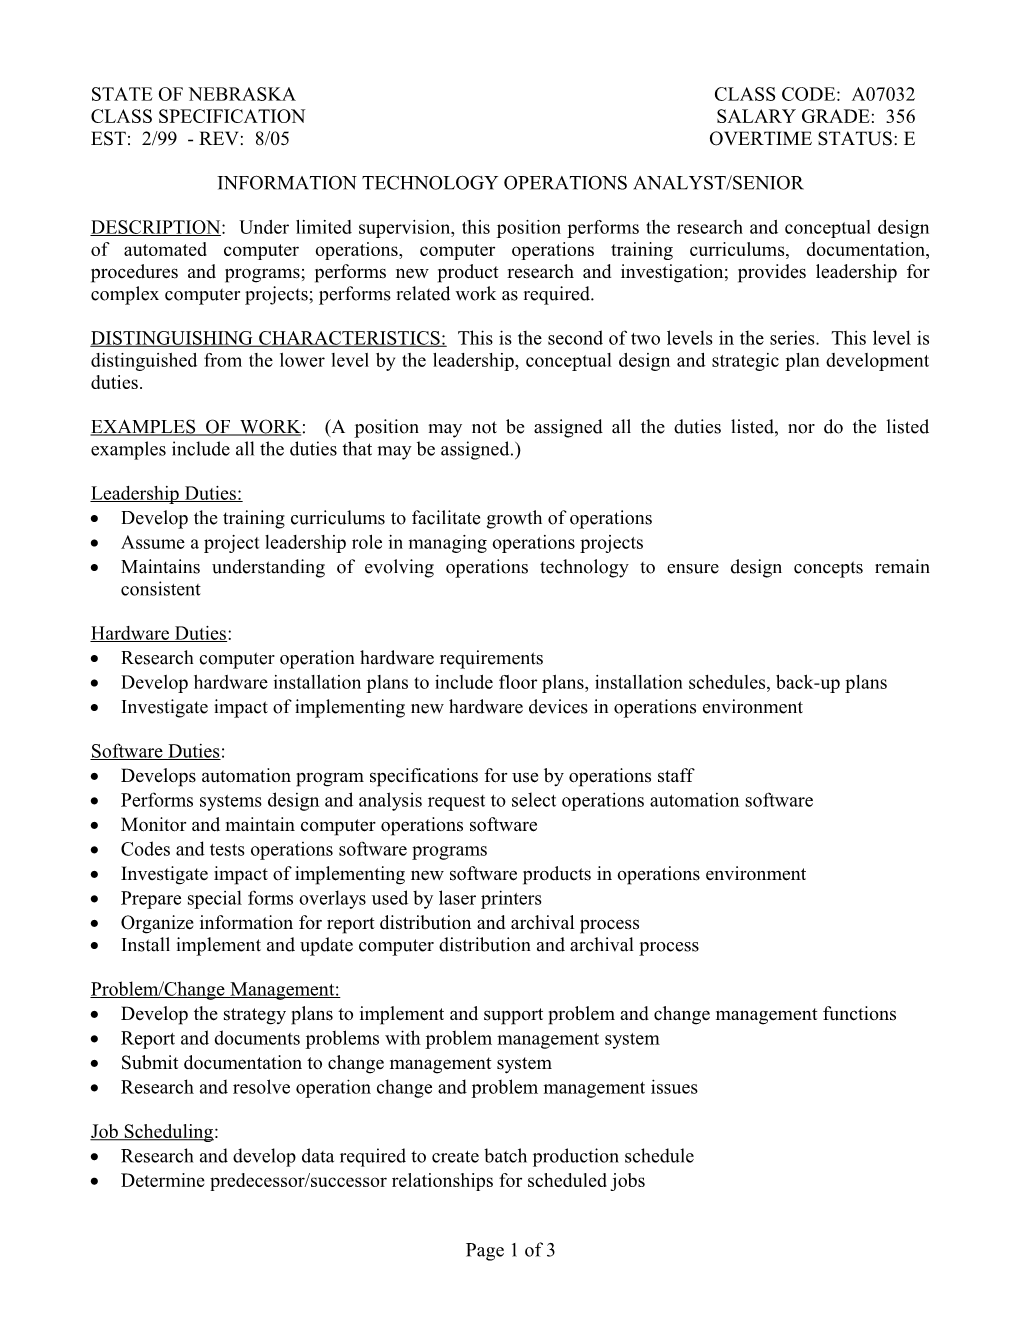 A07032 - IT Operations Analyst/Senior (Continued)